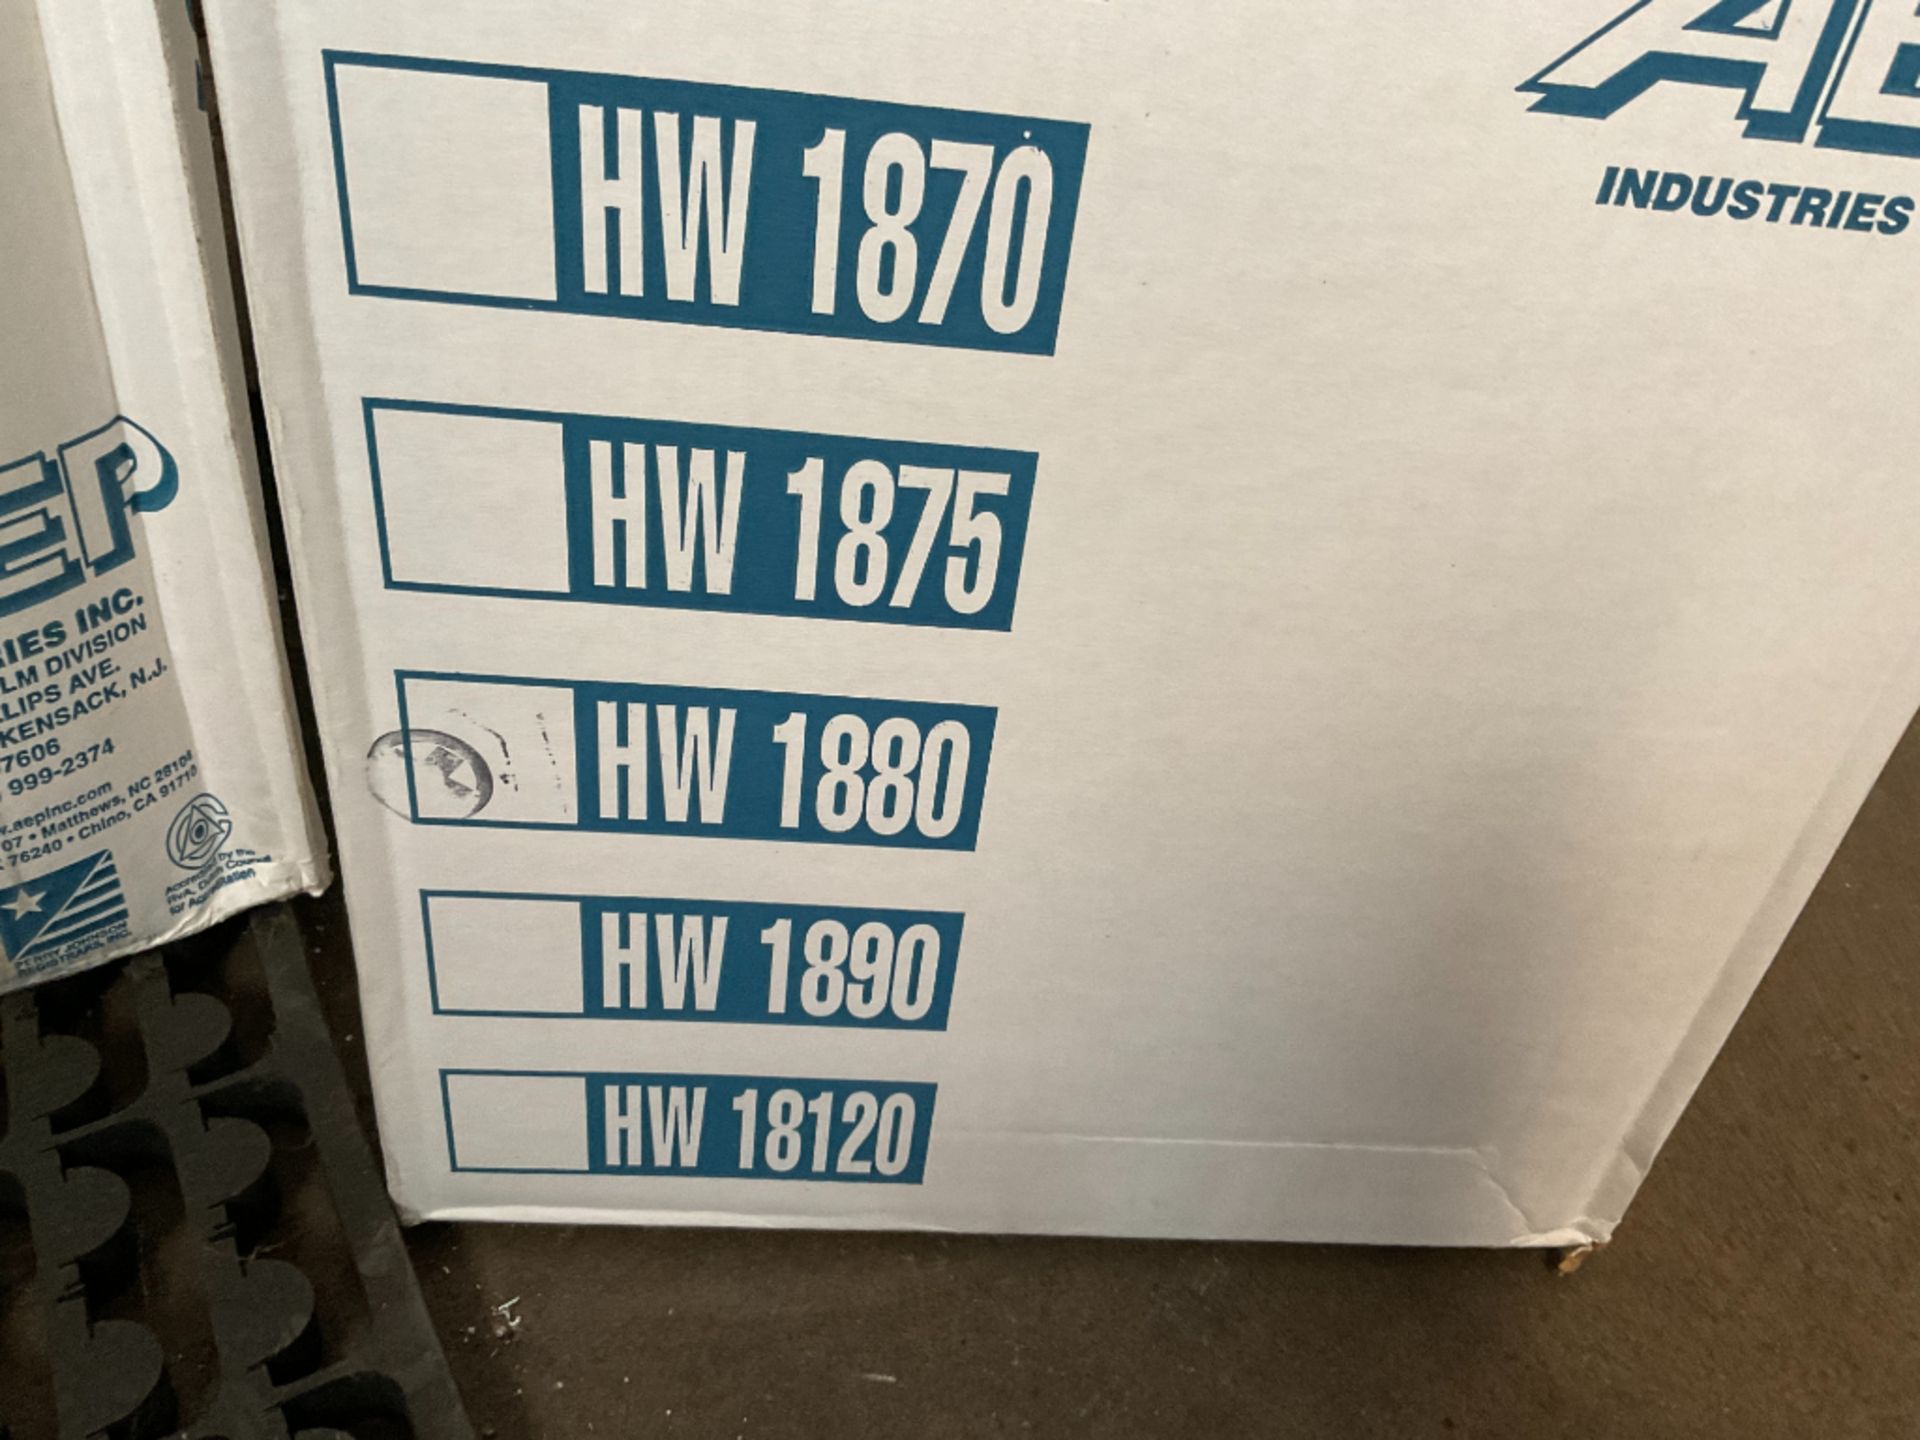 4 Boxes of Hw 1880 Stretch Film - Image 2 of 3